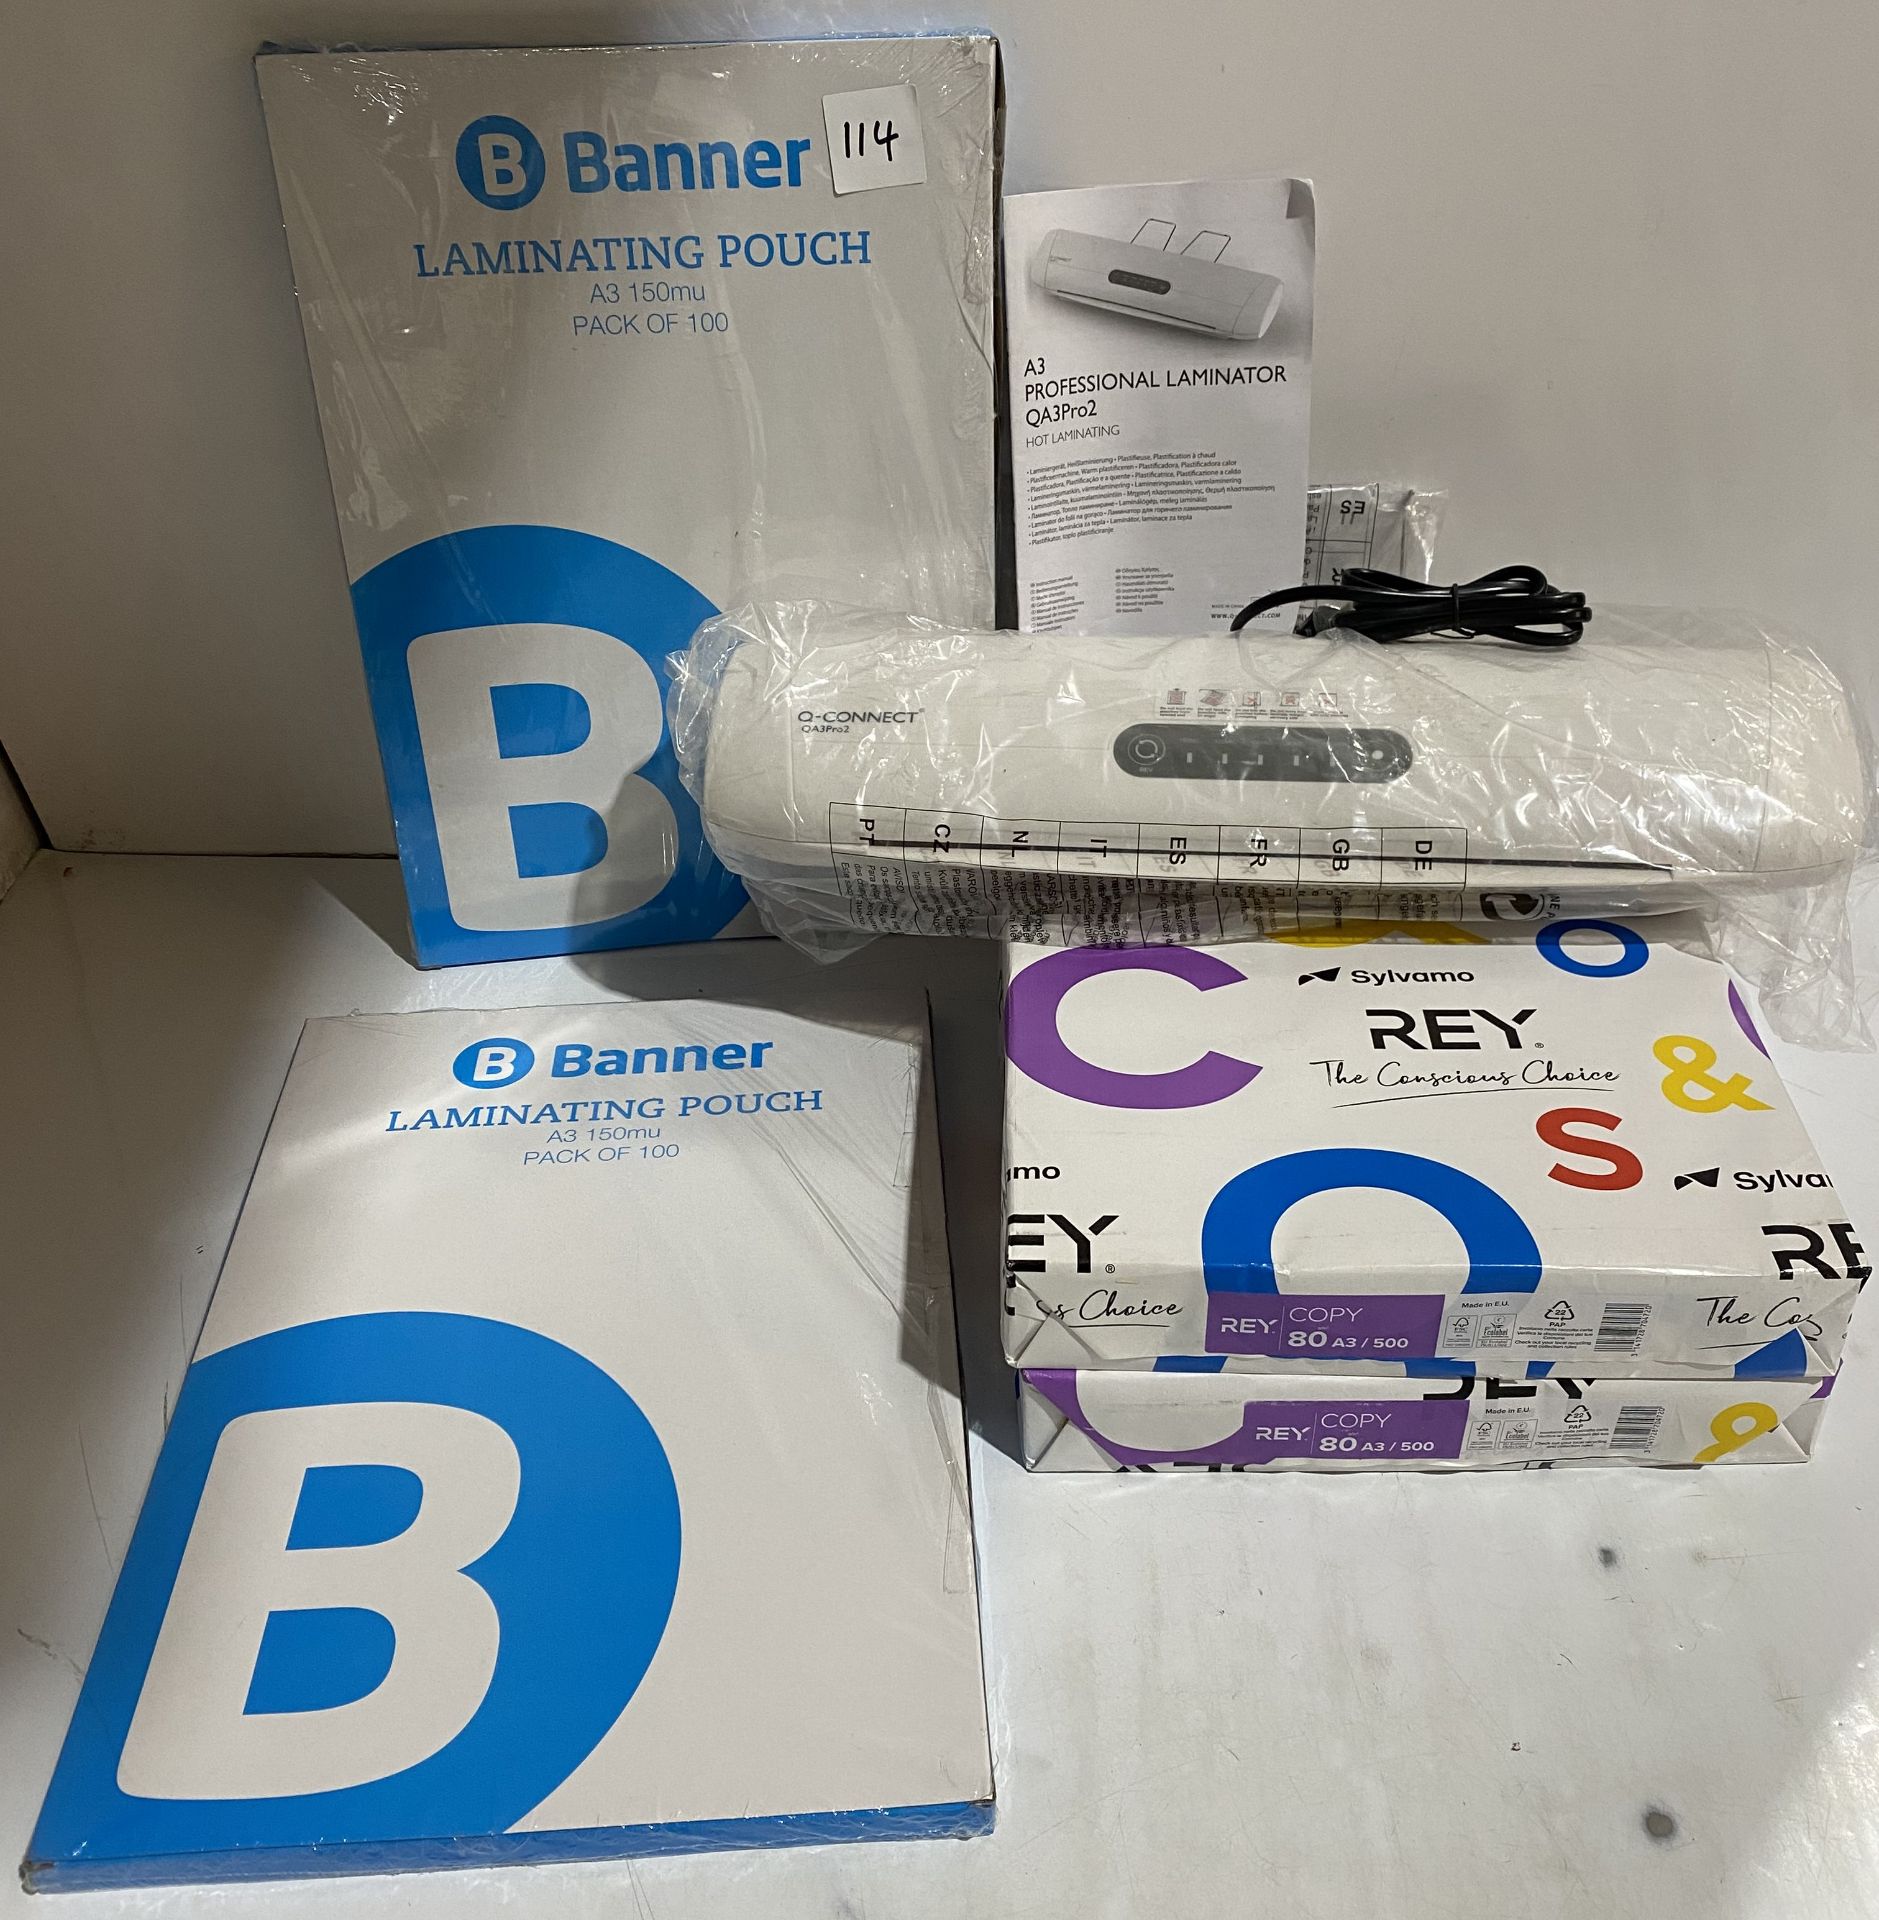 1 x new Q-Connect A3 laminator, 2 x packs of 100 A3 150mic laminating pouches,